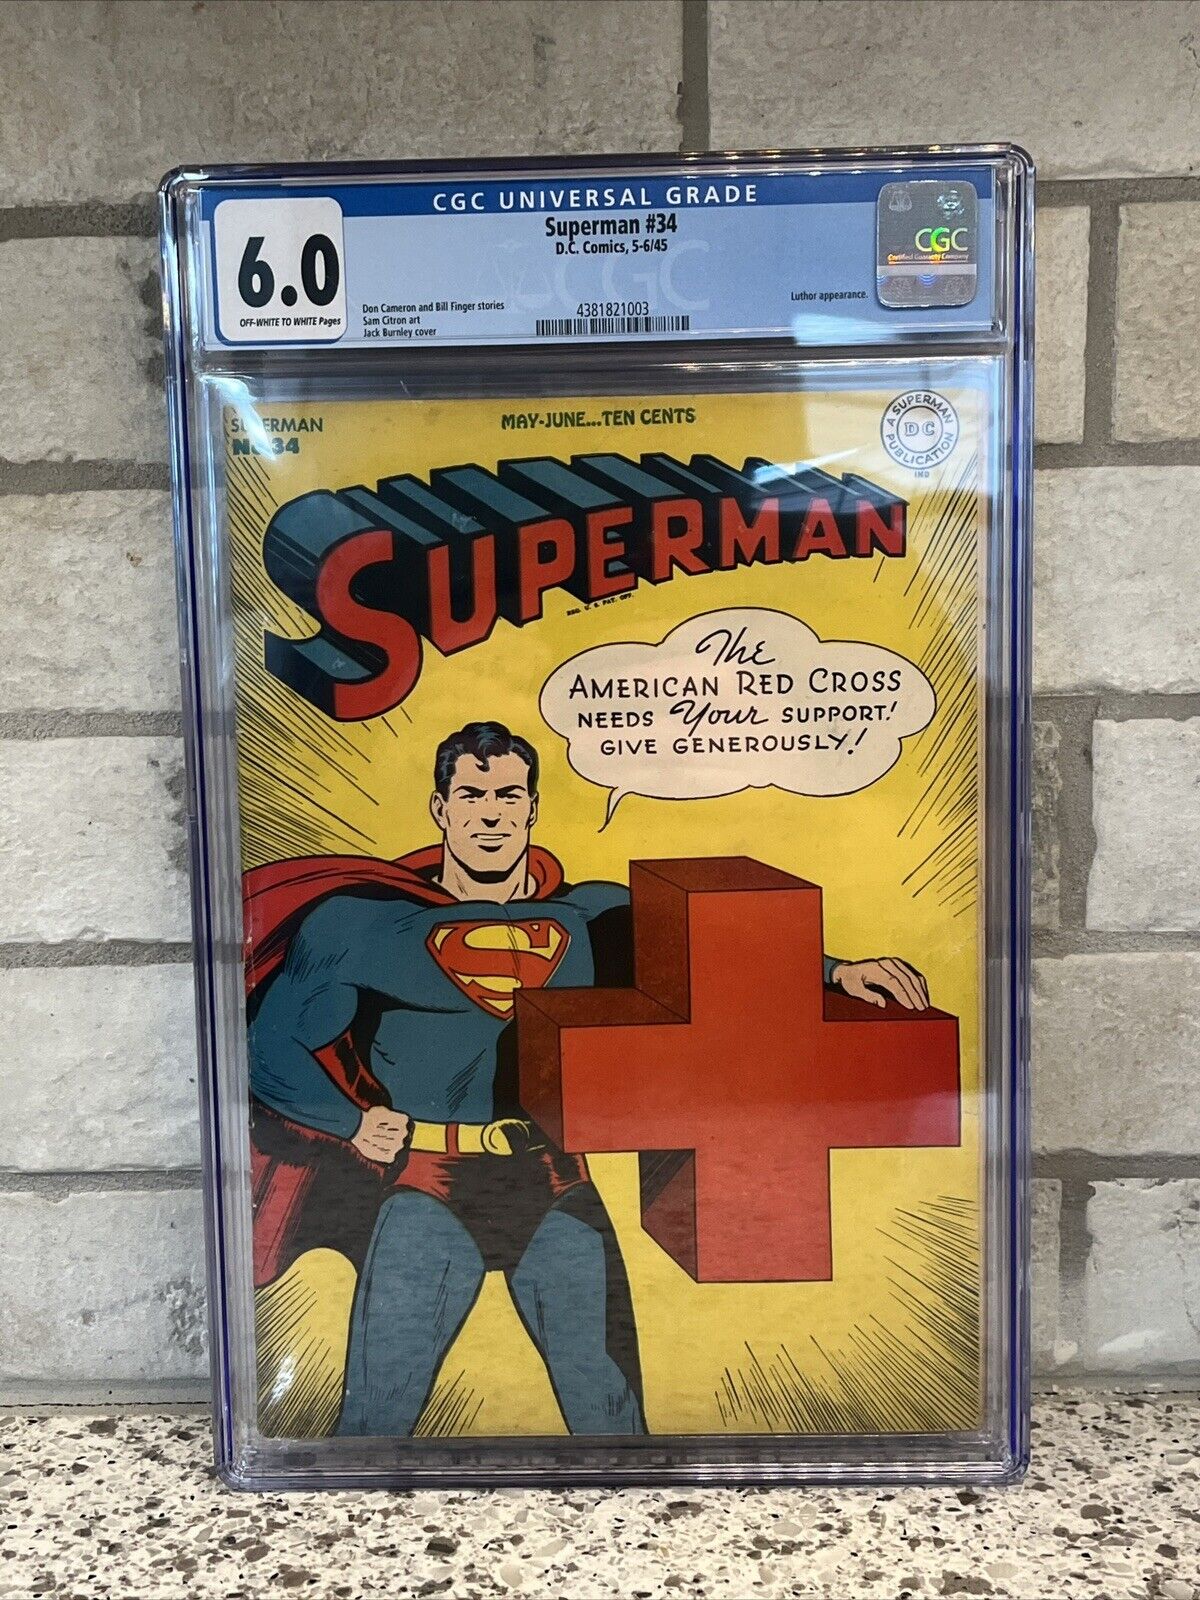 Superman #34 (DC, 1945) CGC 6.0, Red Cross WWII Cover, Lex Luthor Appearance